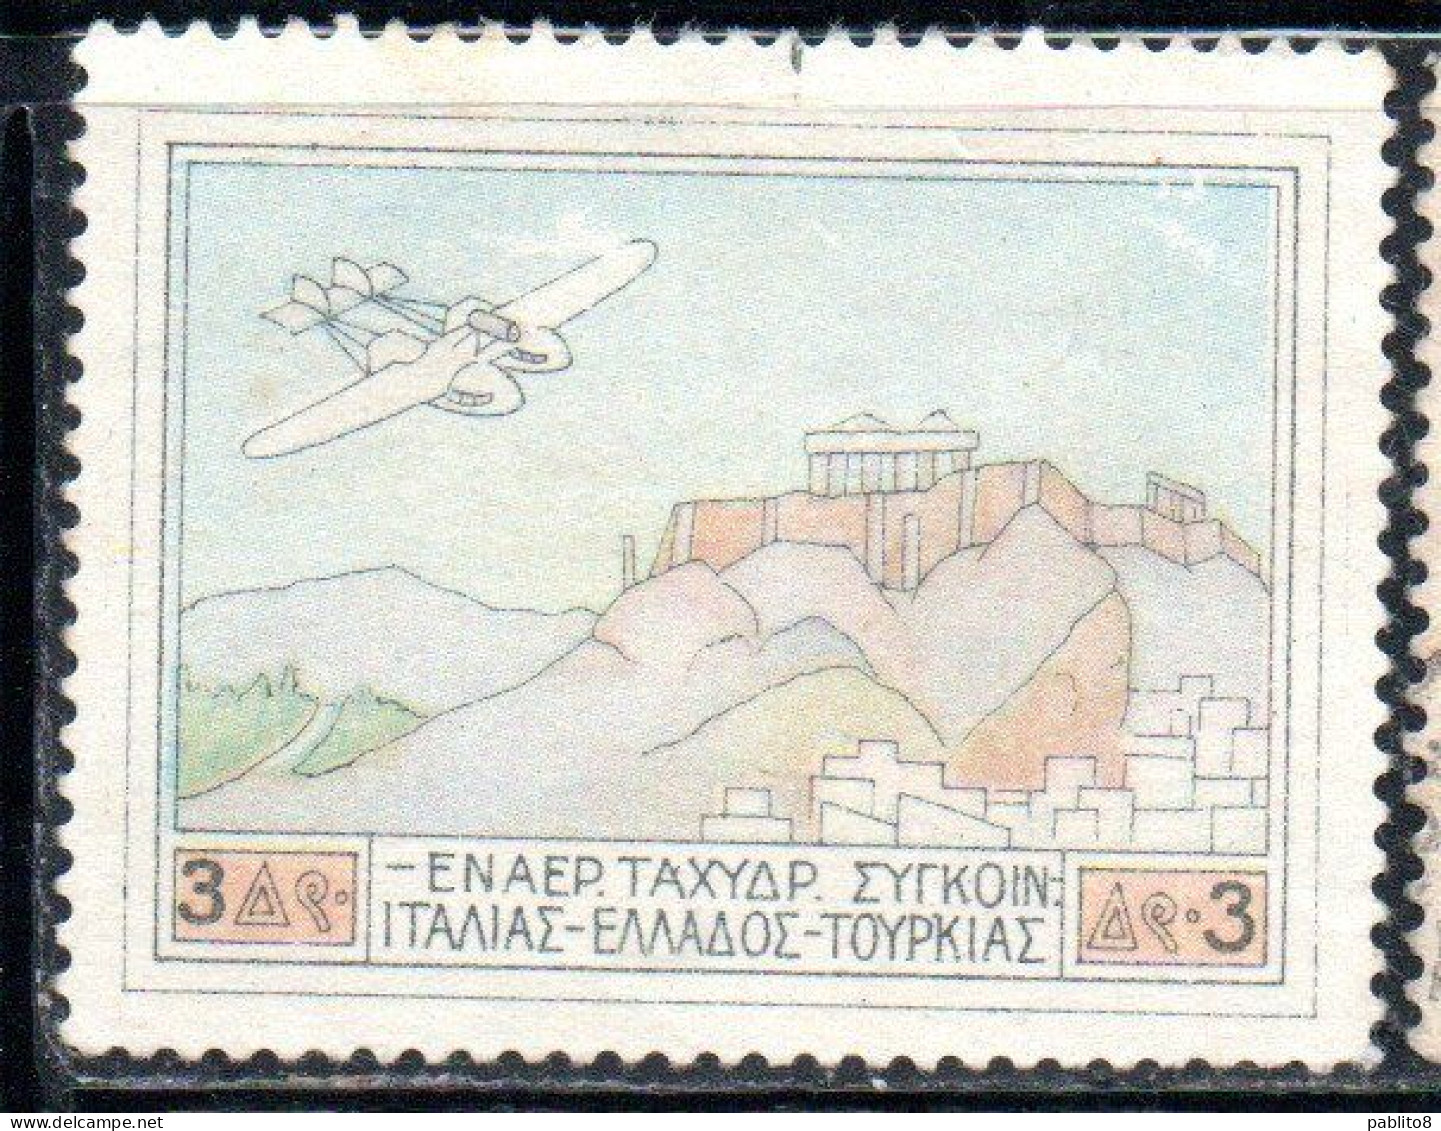 GREECE GRECIA ELLAS 1926 AIR POST MAIL AIRMAIL ITALY-TURKEY-RHODES SERVICE FLYING BOAT OVER ACROPOLIS 3d USED USATO - Usati